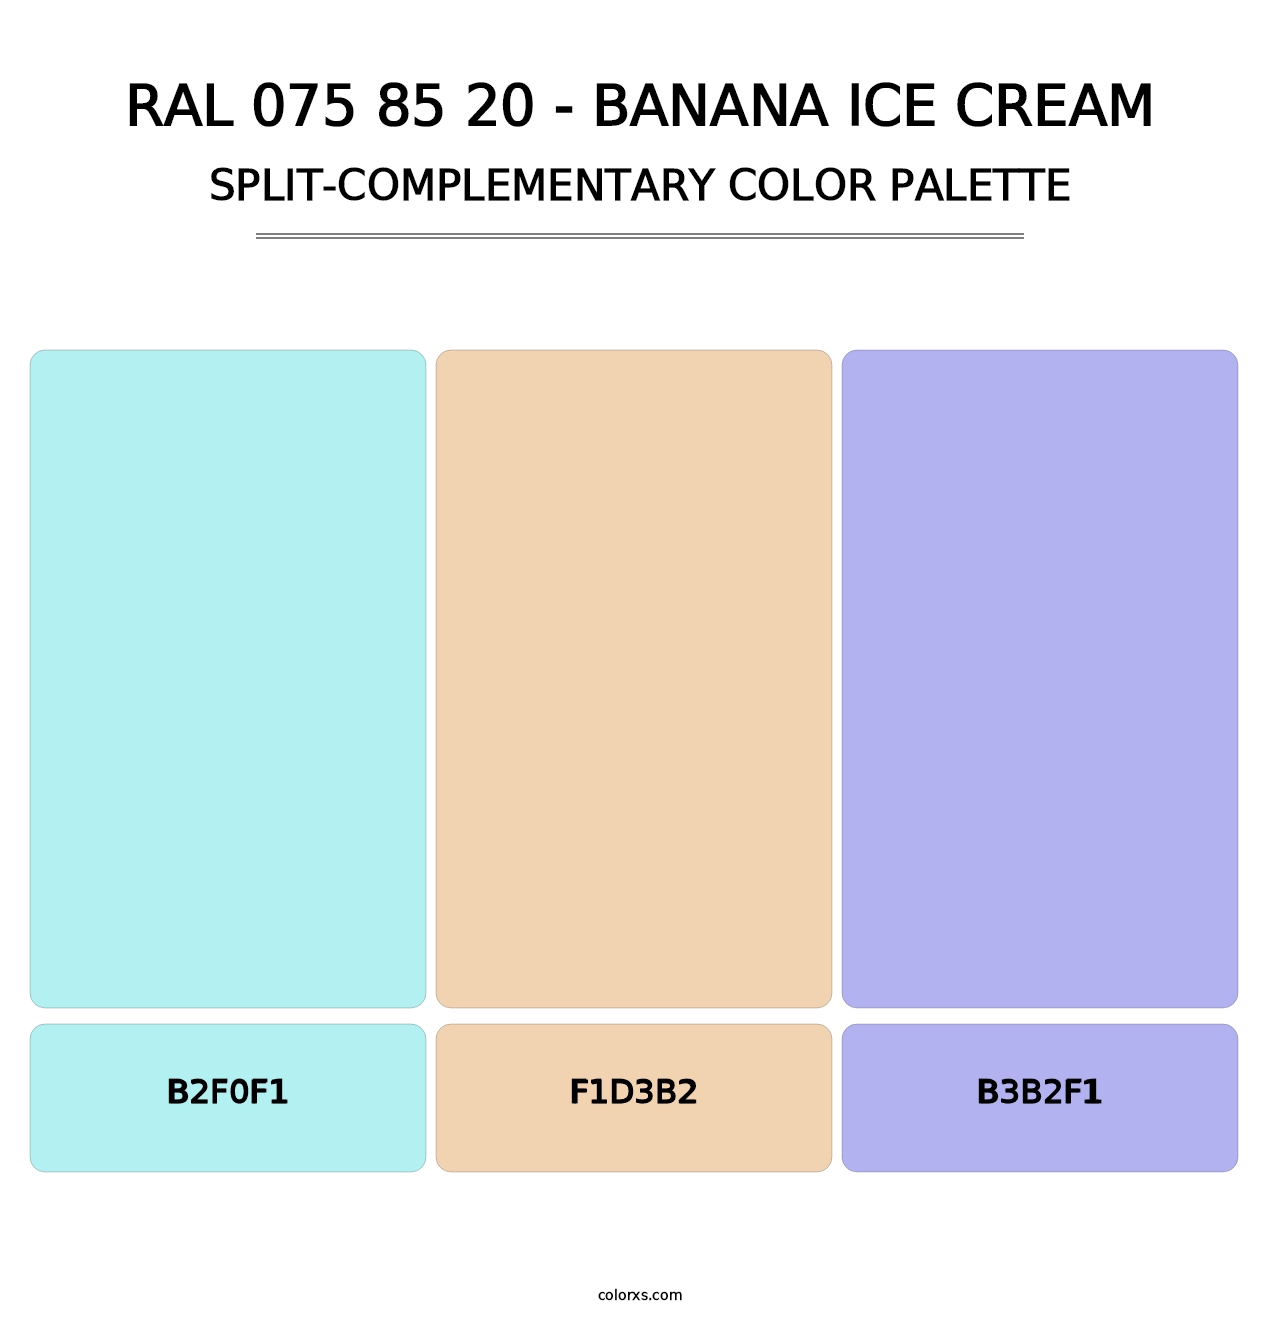 RAL 075 85 20 - Banana Ice Cream - Split-Complementary Color Palette